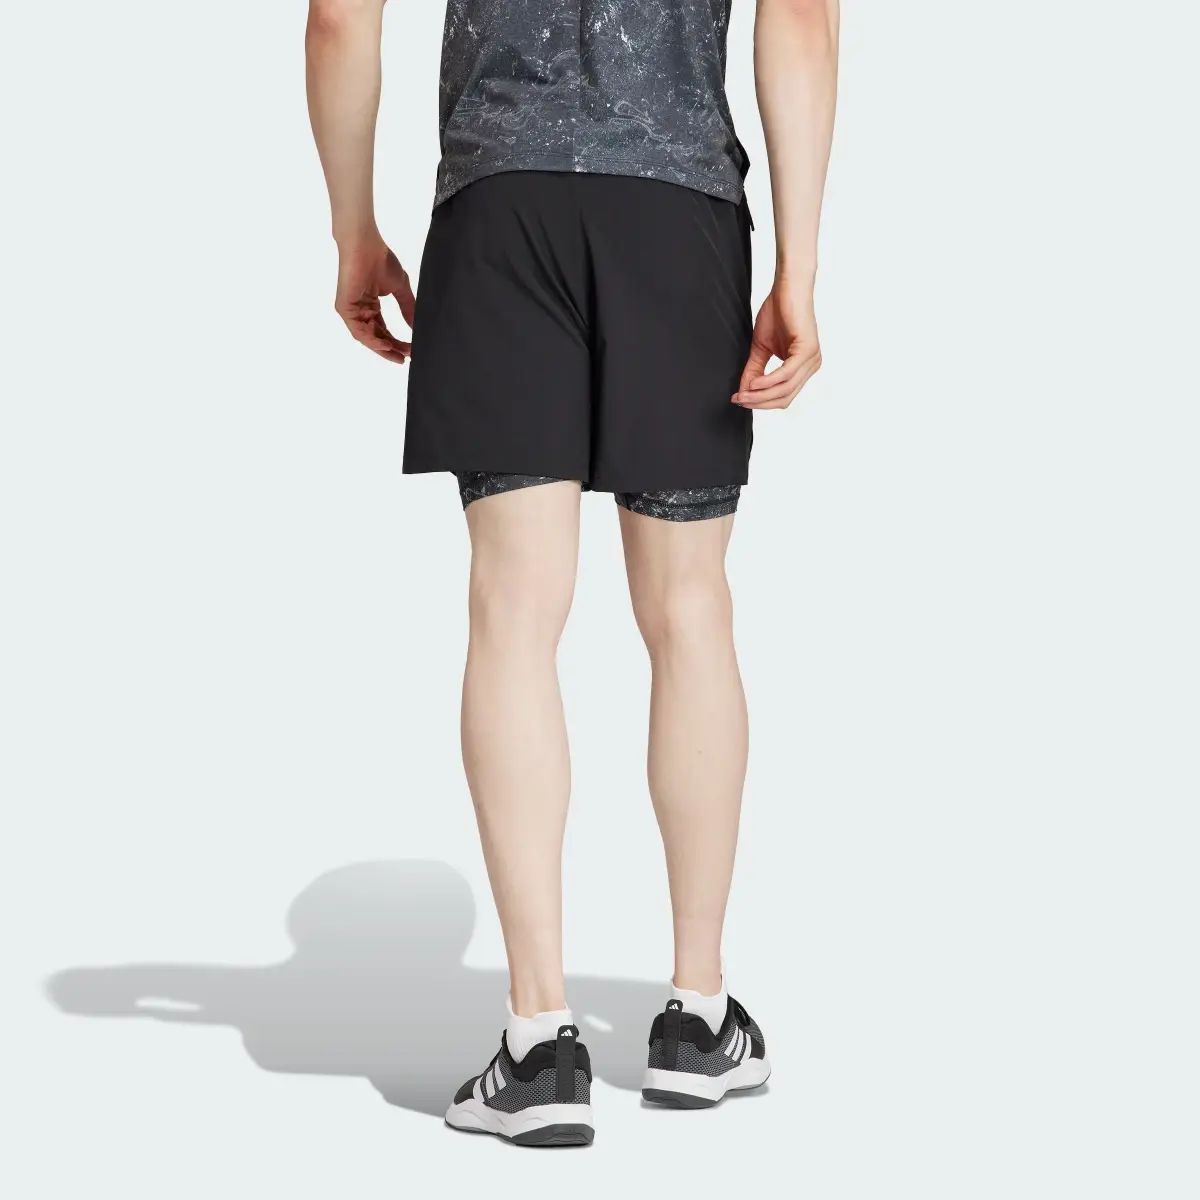 Adidas Power Workout 2-in-1 Shorts. 2